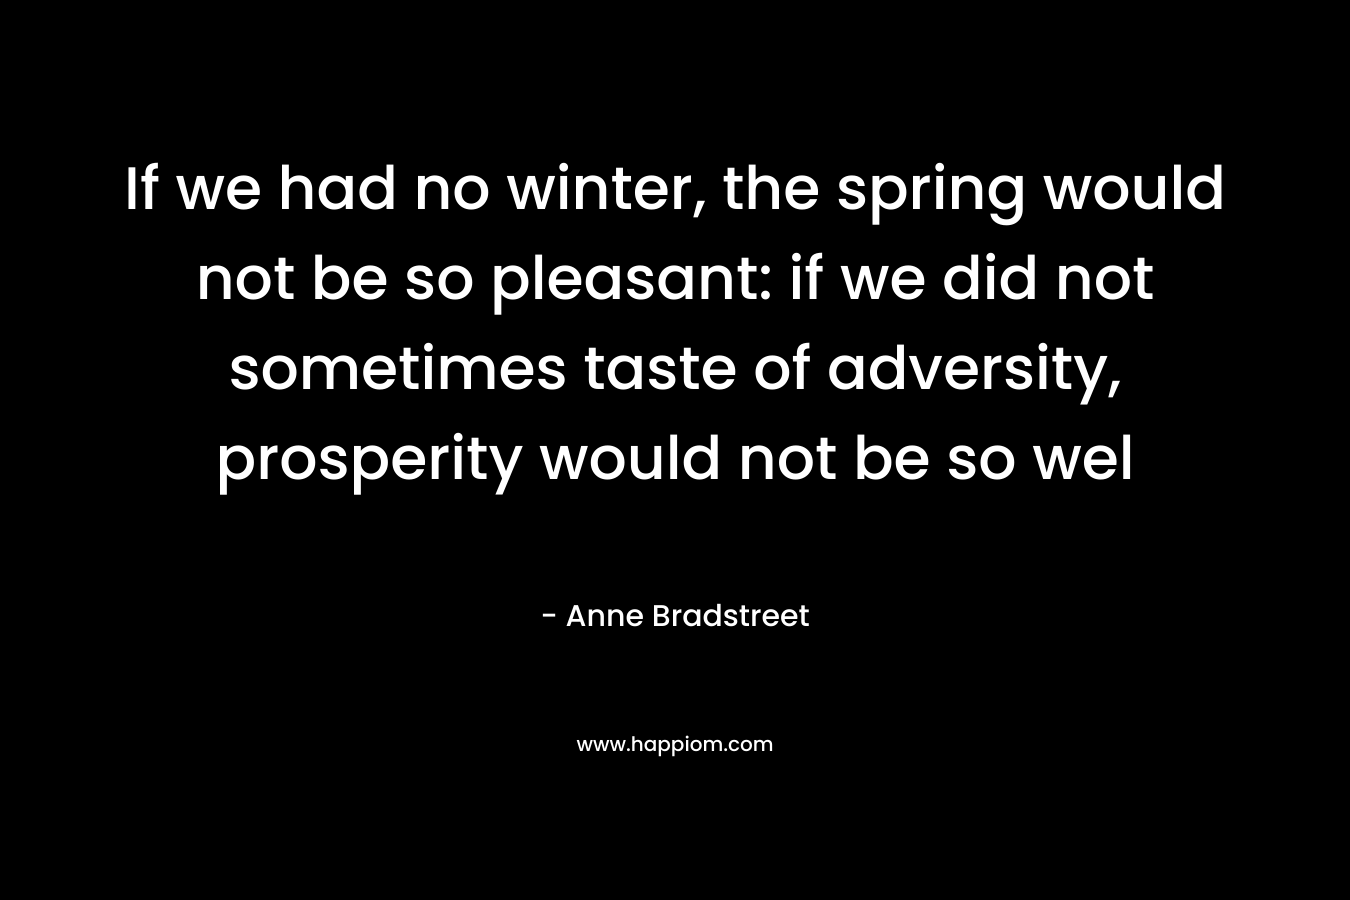 If we had no winter, the spring would not be so pleasant: if we did not sometimes taste of adversity, prosperity would not be so wel – Anne Bradstreet